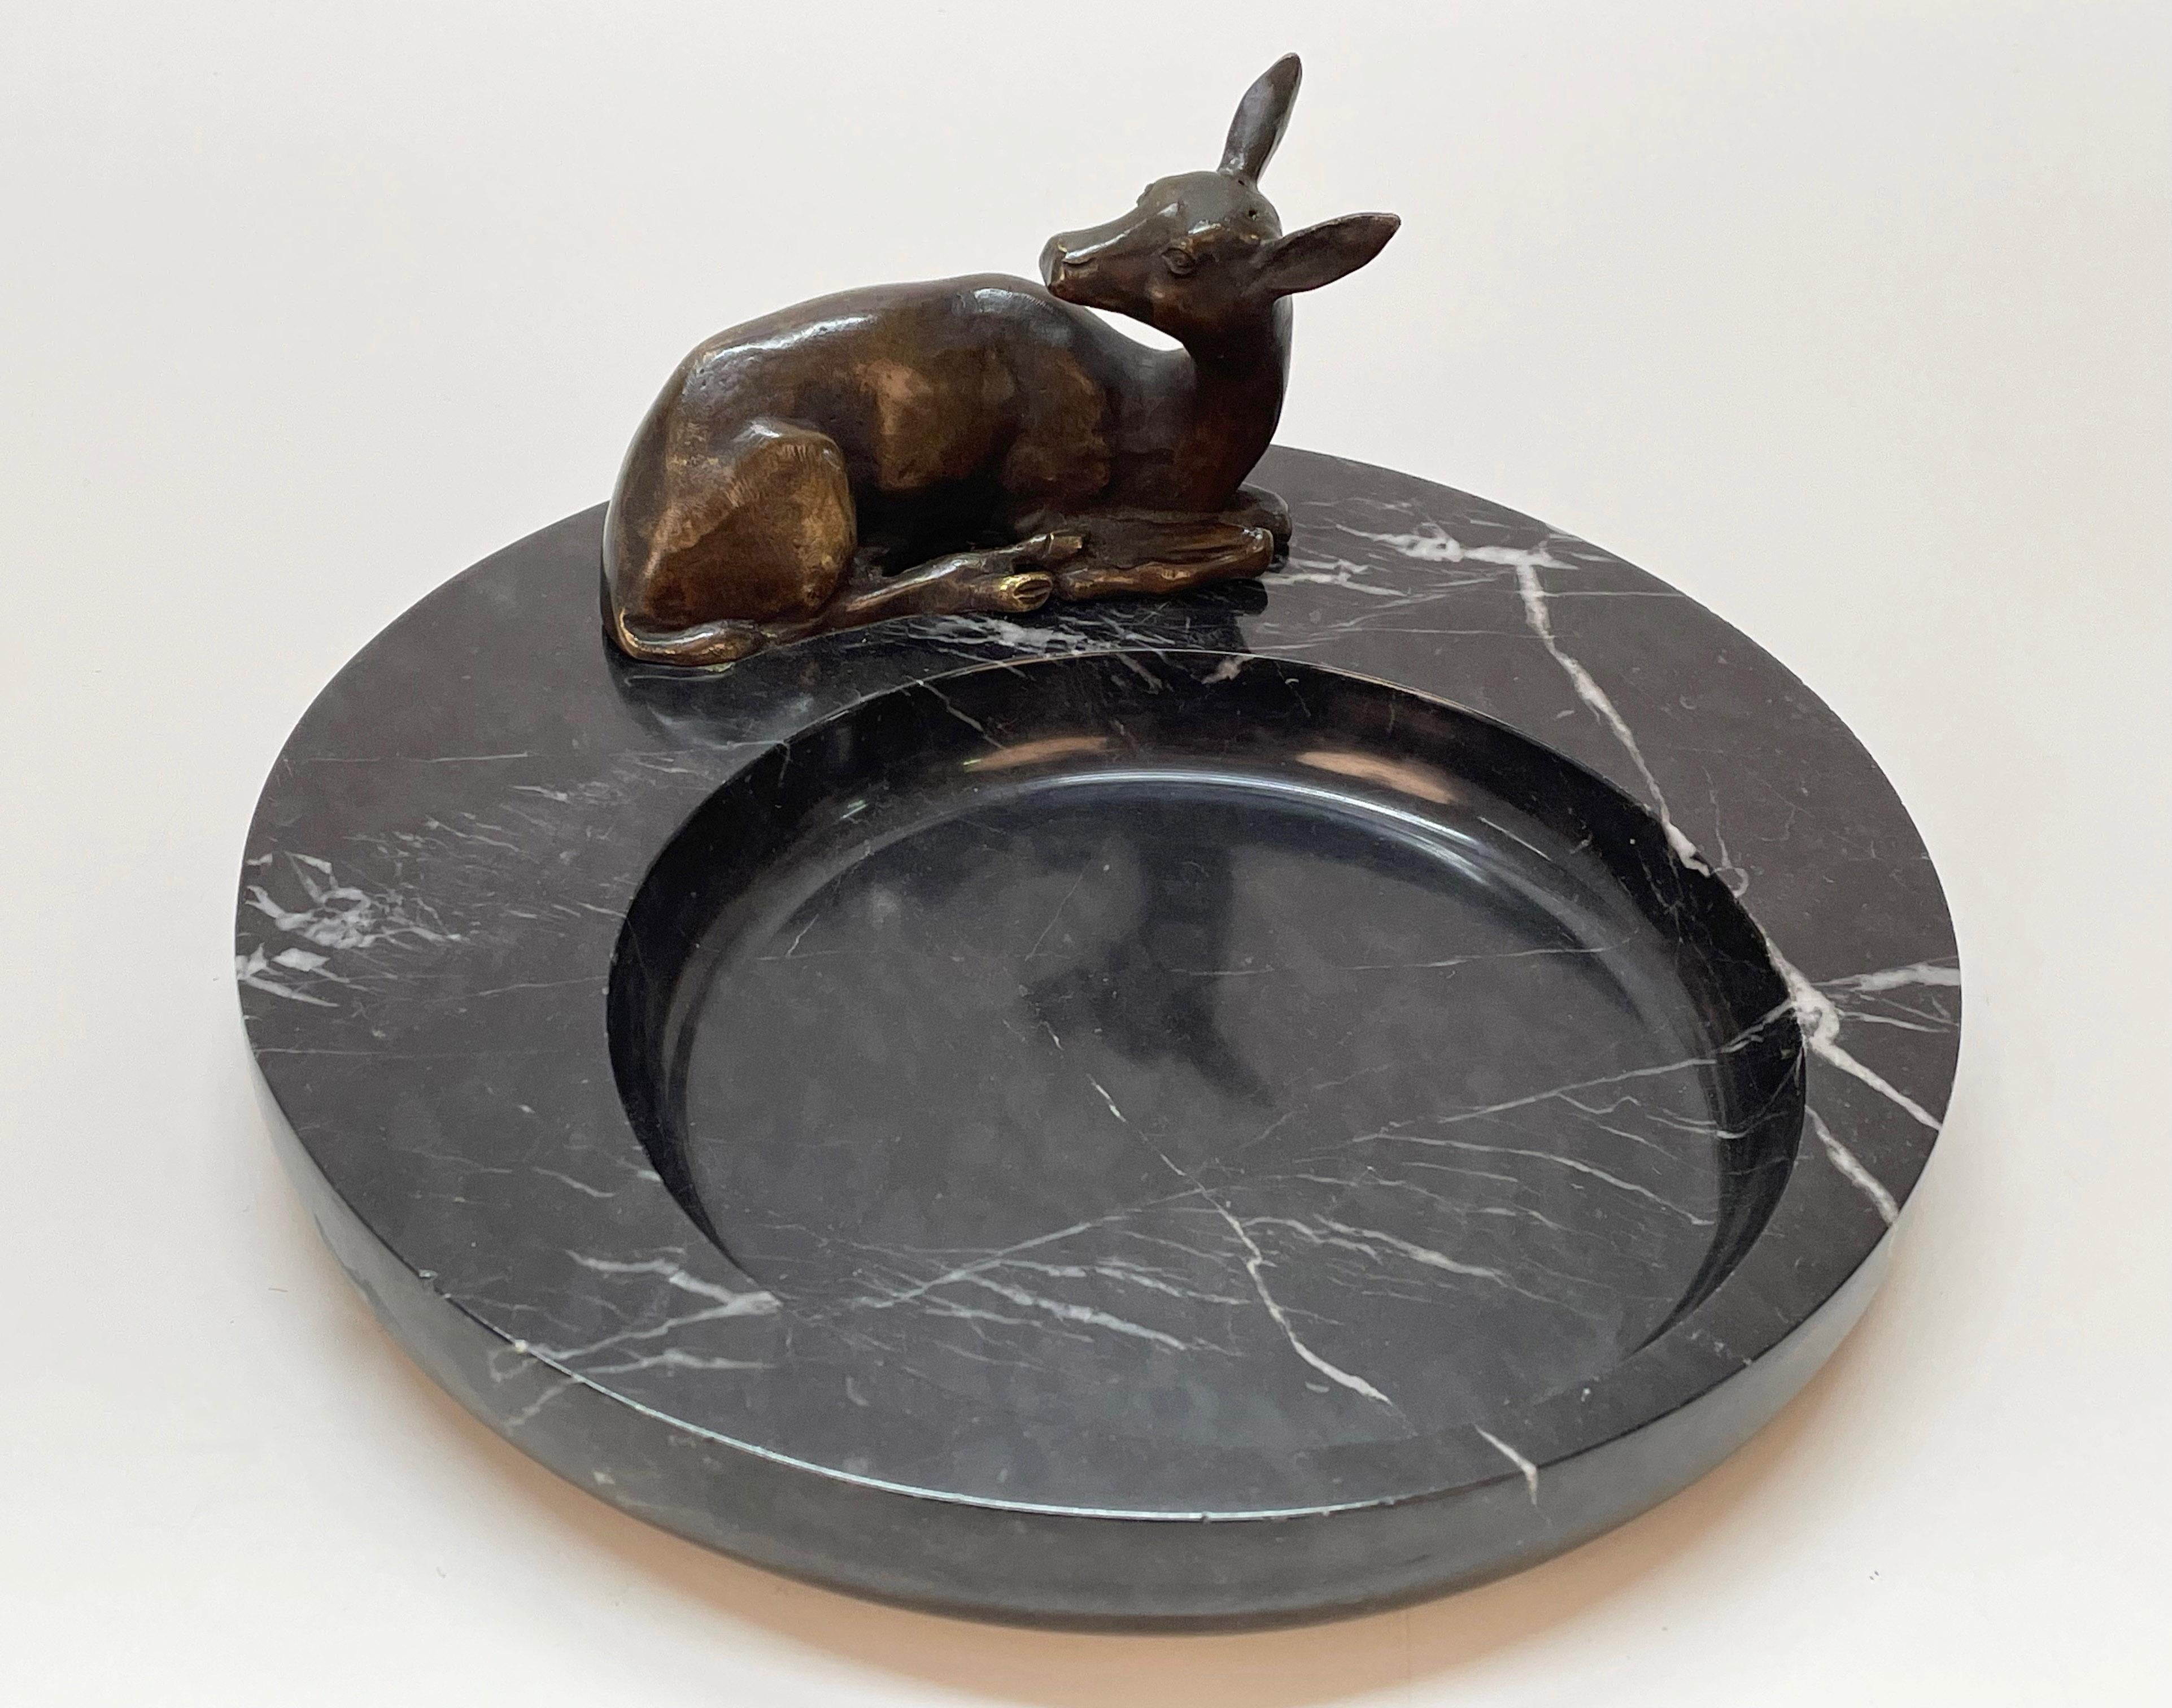 Mid-20th Century Midcentury Bronze and Black Marble Italian Ashtray with Deer Sculpture, 1930s